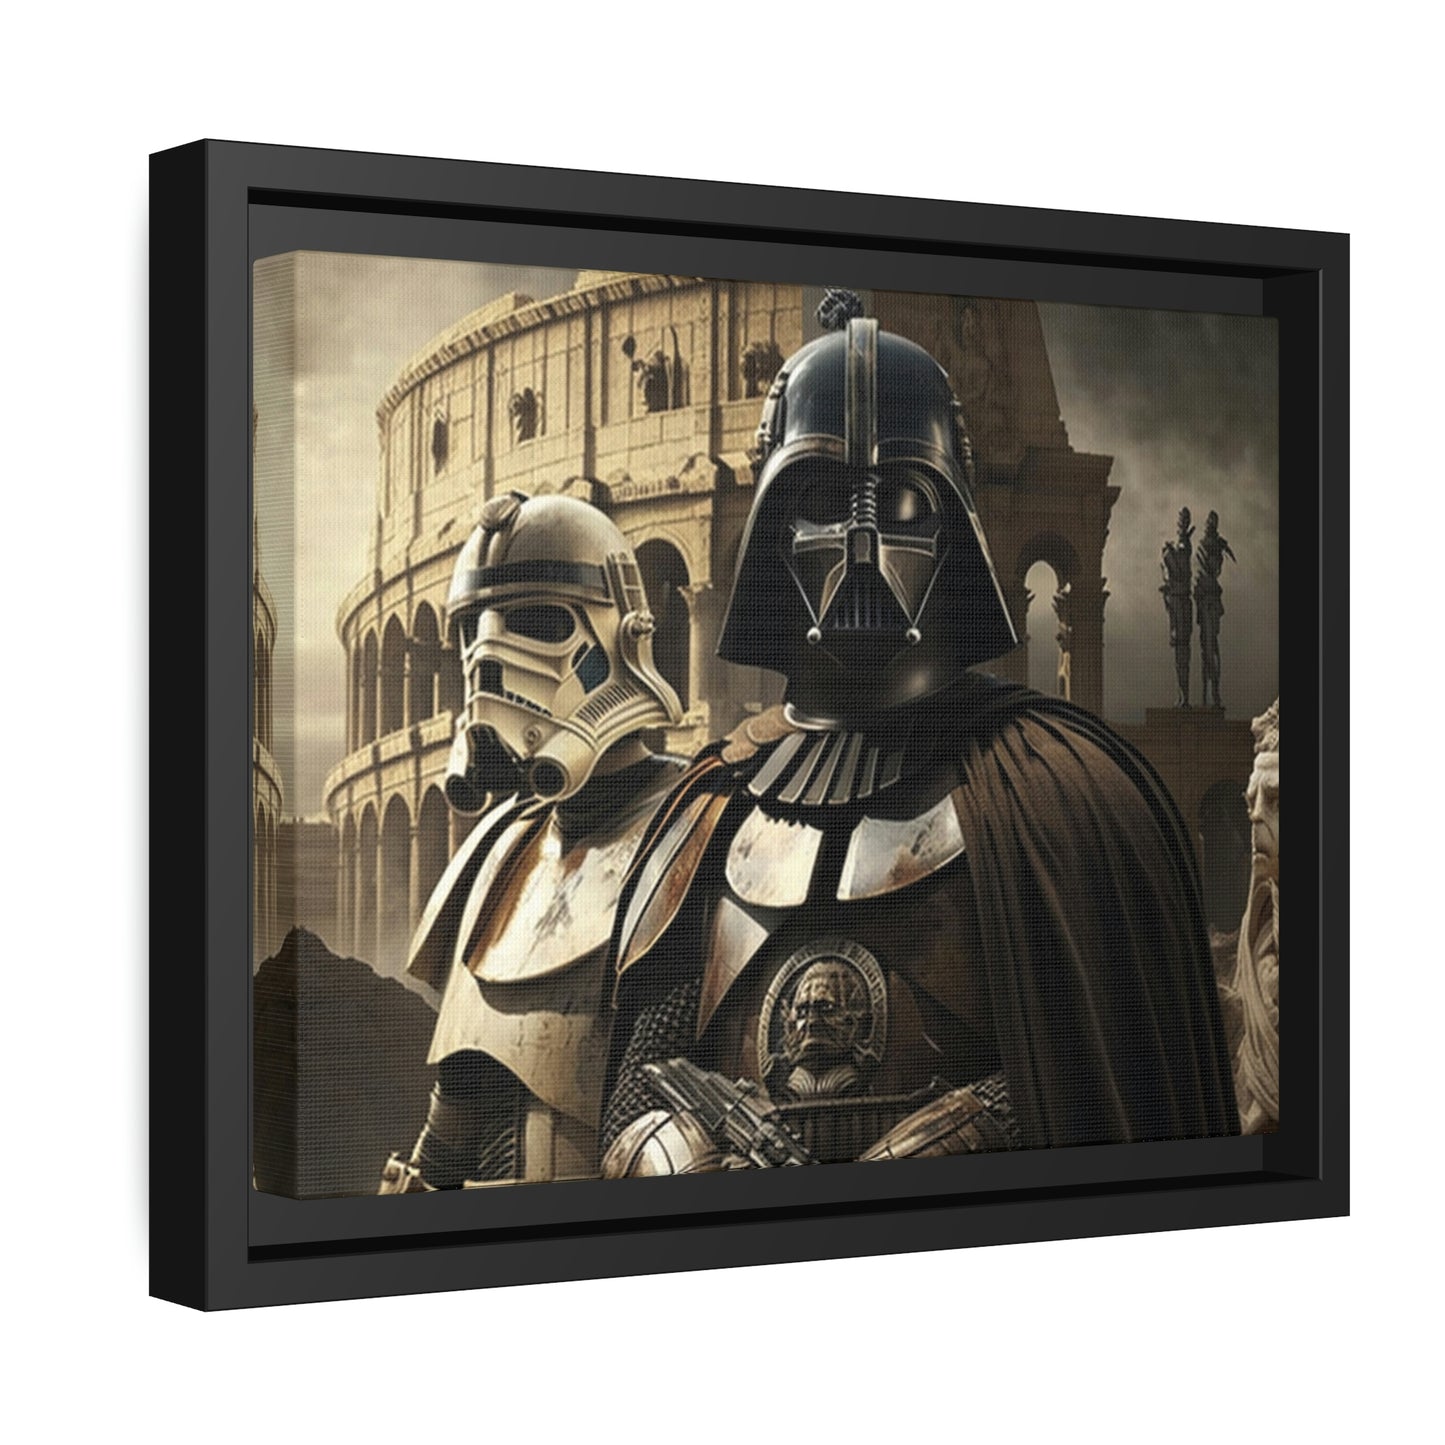 Darth Vader and Stormtrooper Colosseum